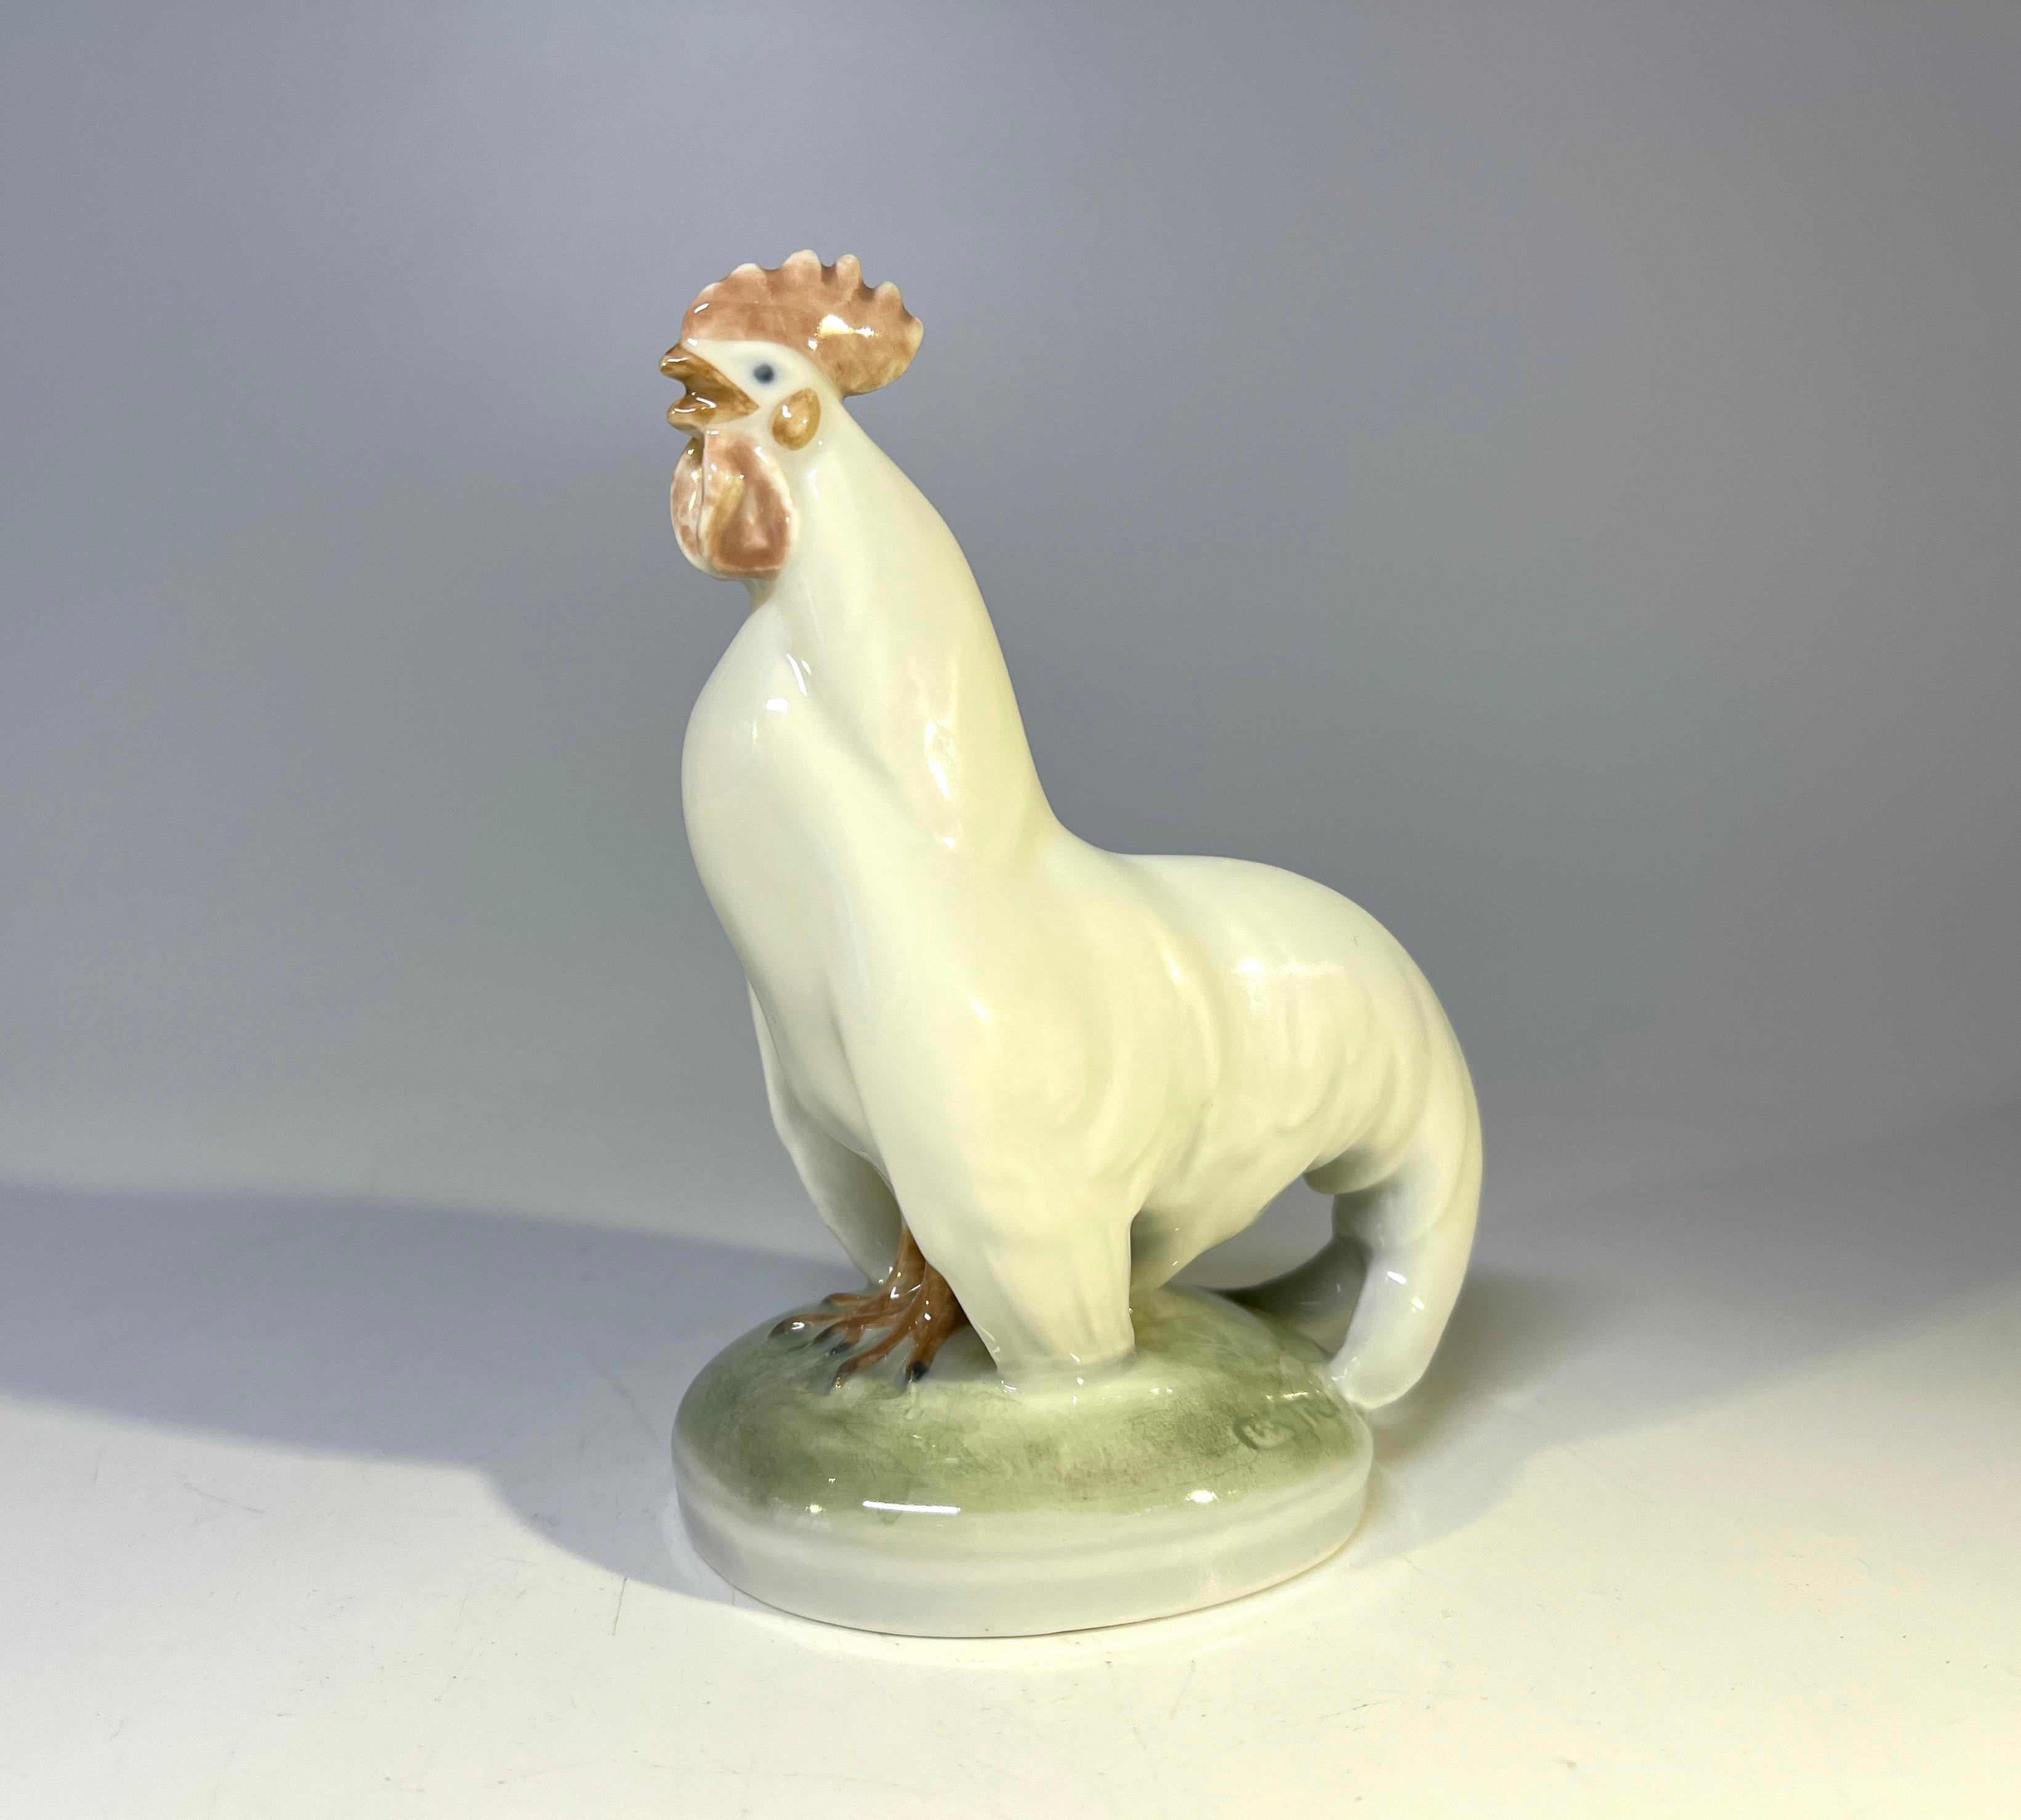 Christian Thomsen for Royal Copenhagen porcelain cockerel figurine.
Created in 1923, a classic collectible piece.
Signed and numbered 1126.
circa 1923.
Measures: height 4.25 inch, width 3 inch, depth 2 inch.
In excellent condition.
 